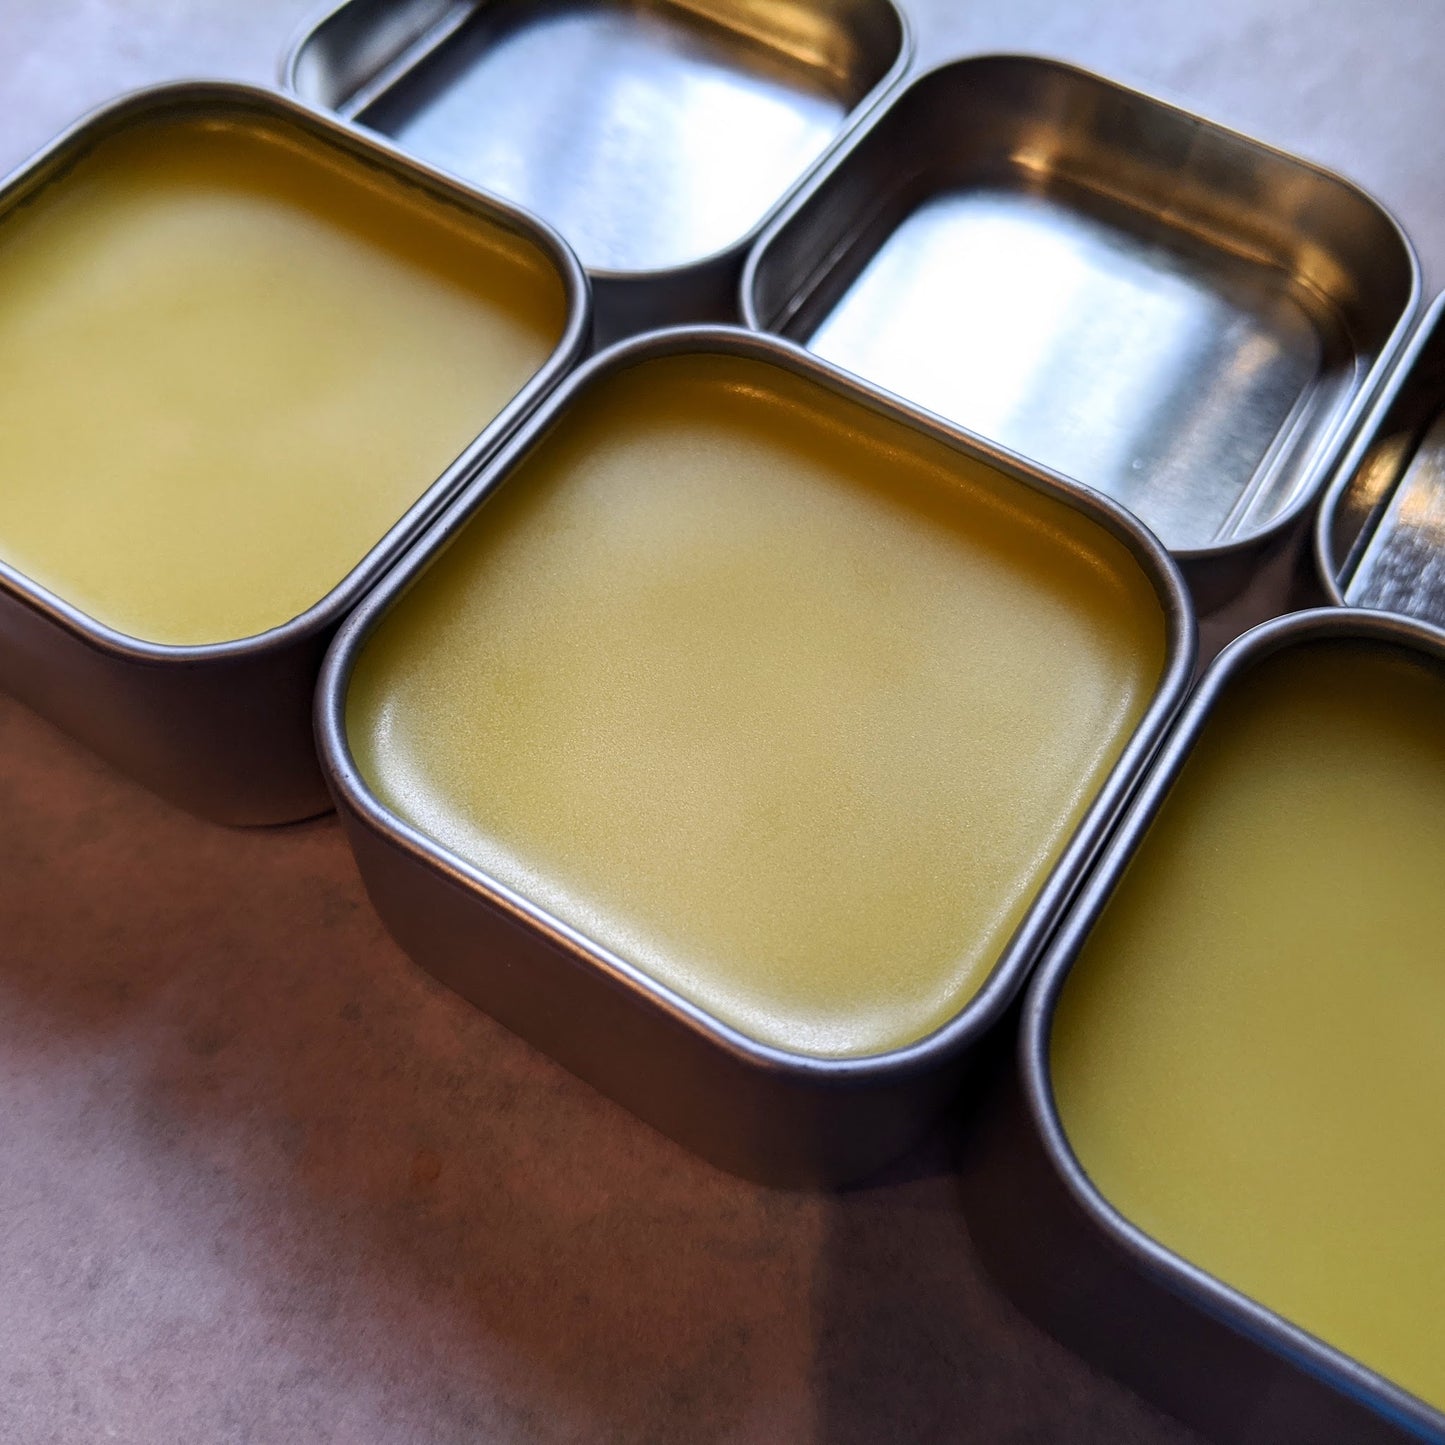 Open tins of butcher's block wax with a silky blend of olive oil and beeswax to revitalize wood, leather and more.